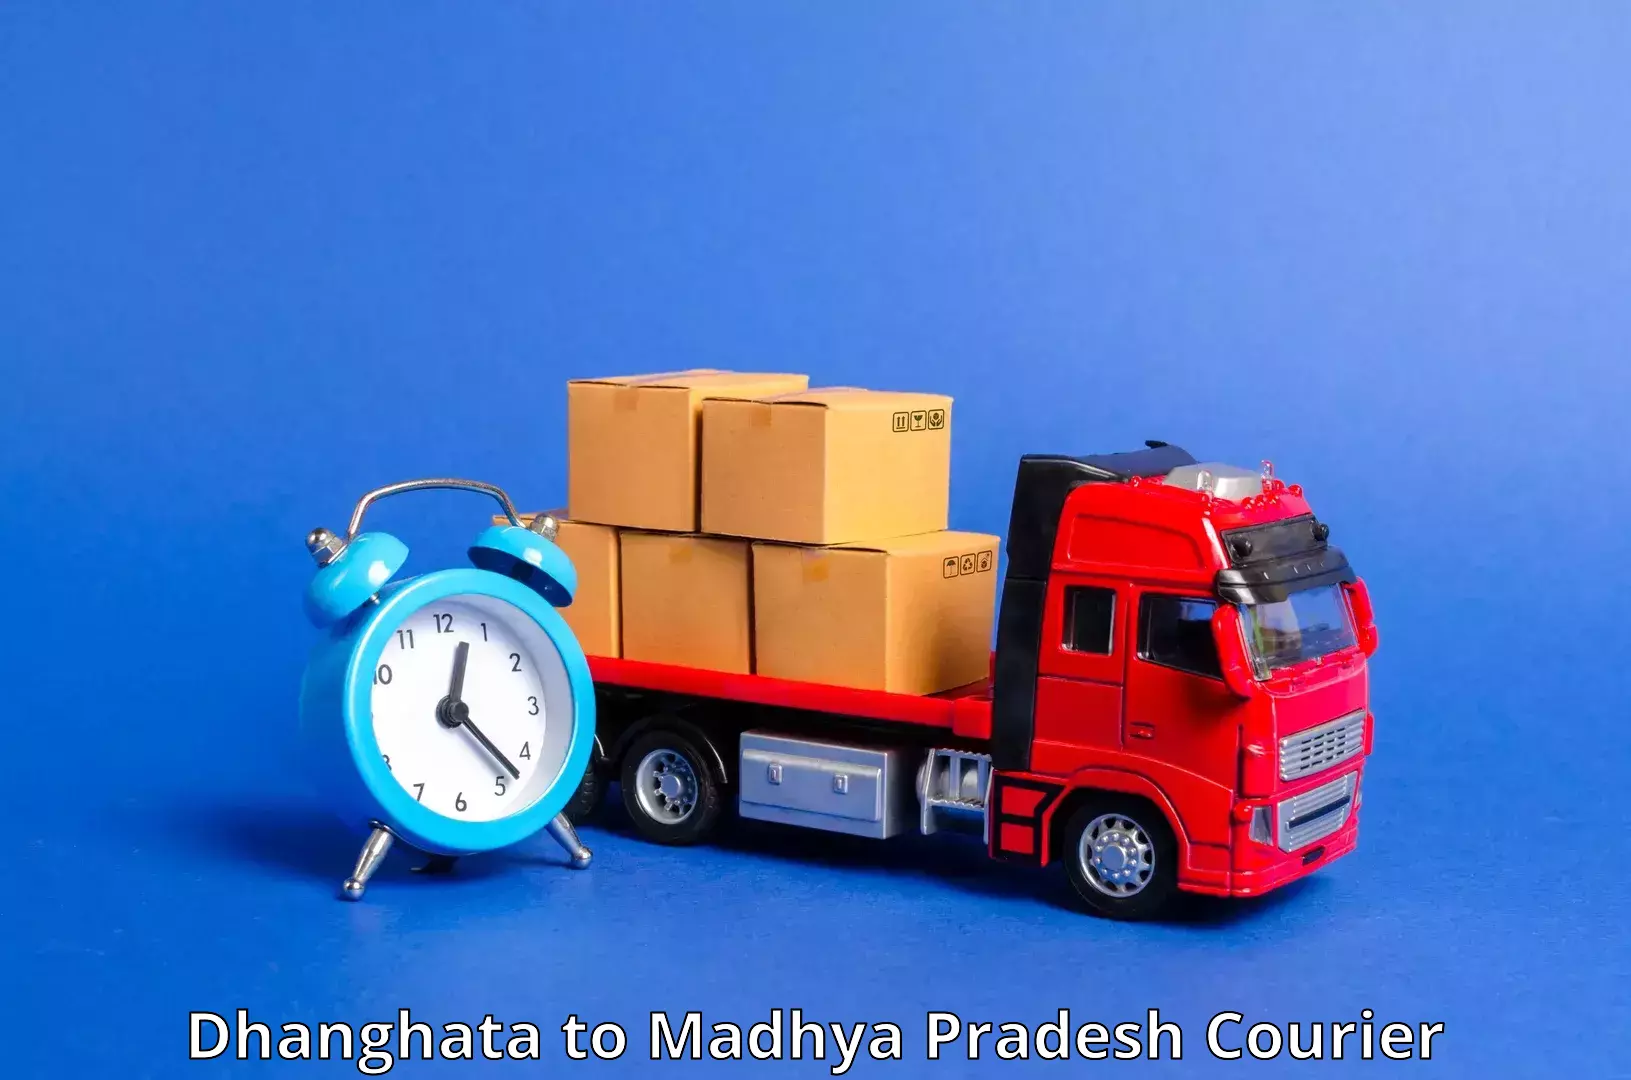 Reliable courier service Dhanghata to Nainpur